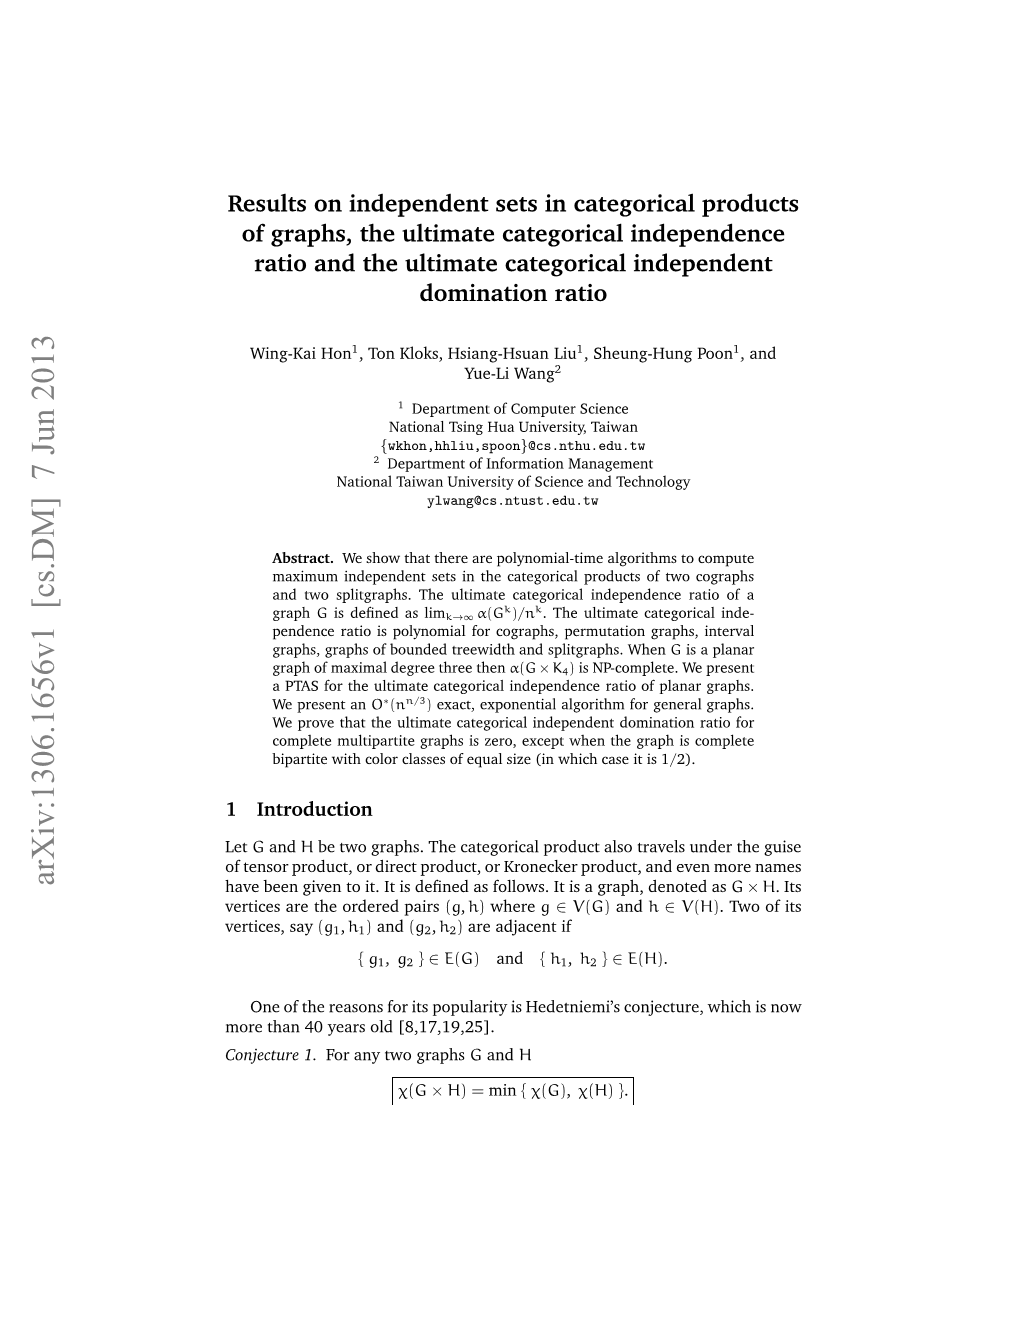 Results on Independent Sets in Categorical Products of Graphs, The